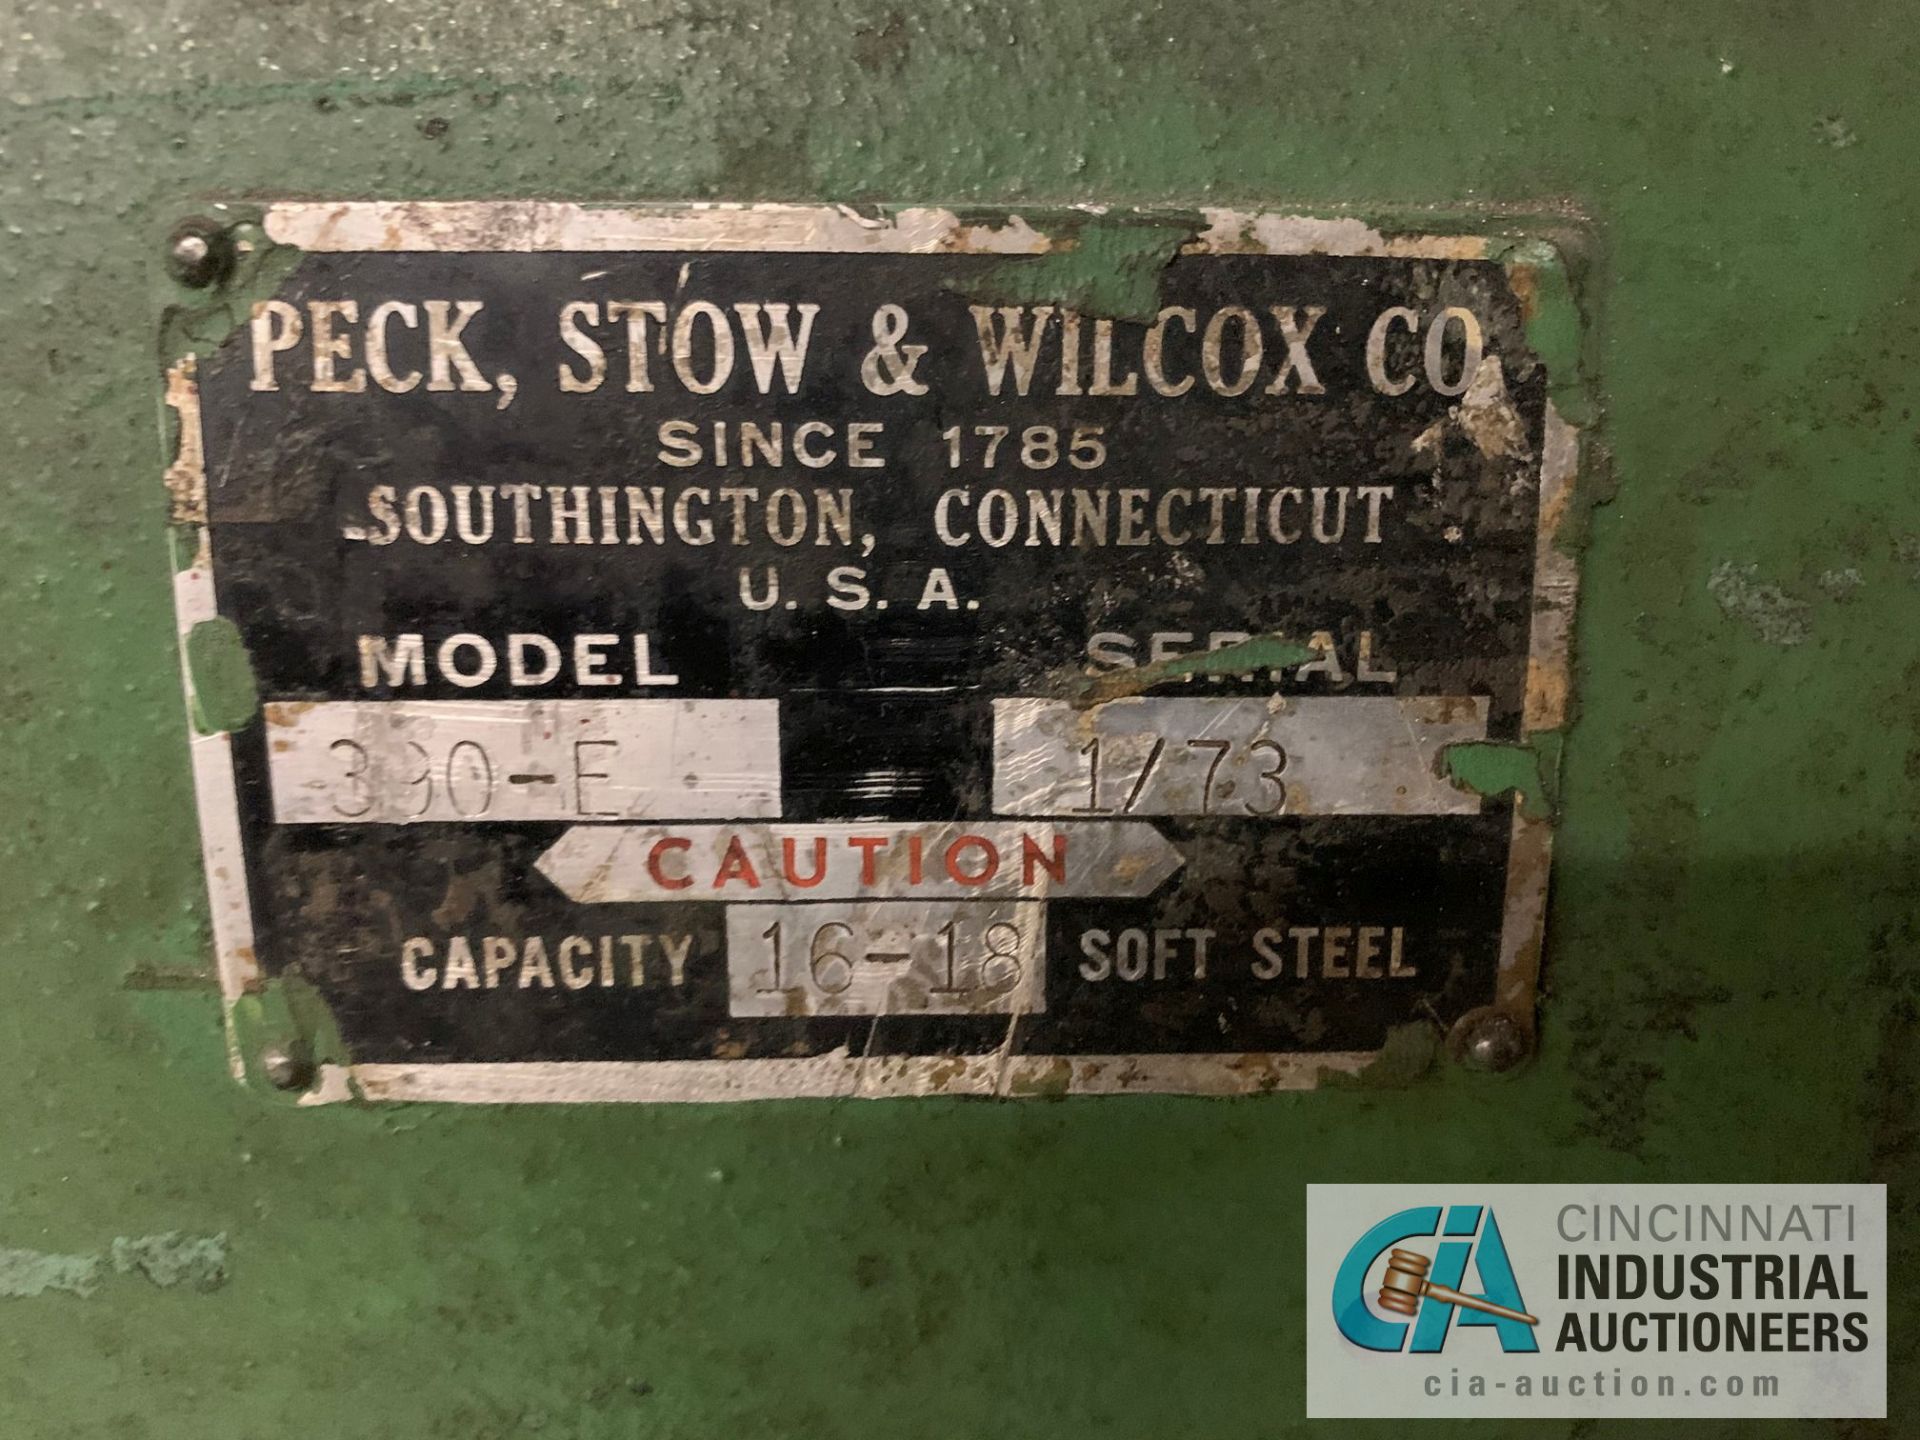 36" PECK, STOW AND WILCOX MODEL 390E HAND SLIP ROLL; S/N 1/73, CAPACITY 16-18 GA. - Image 2 of 5